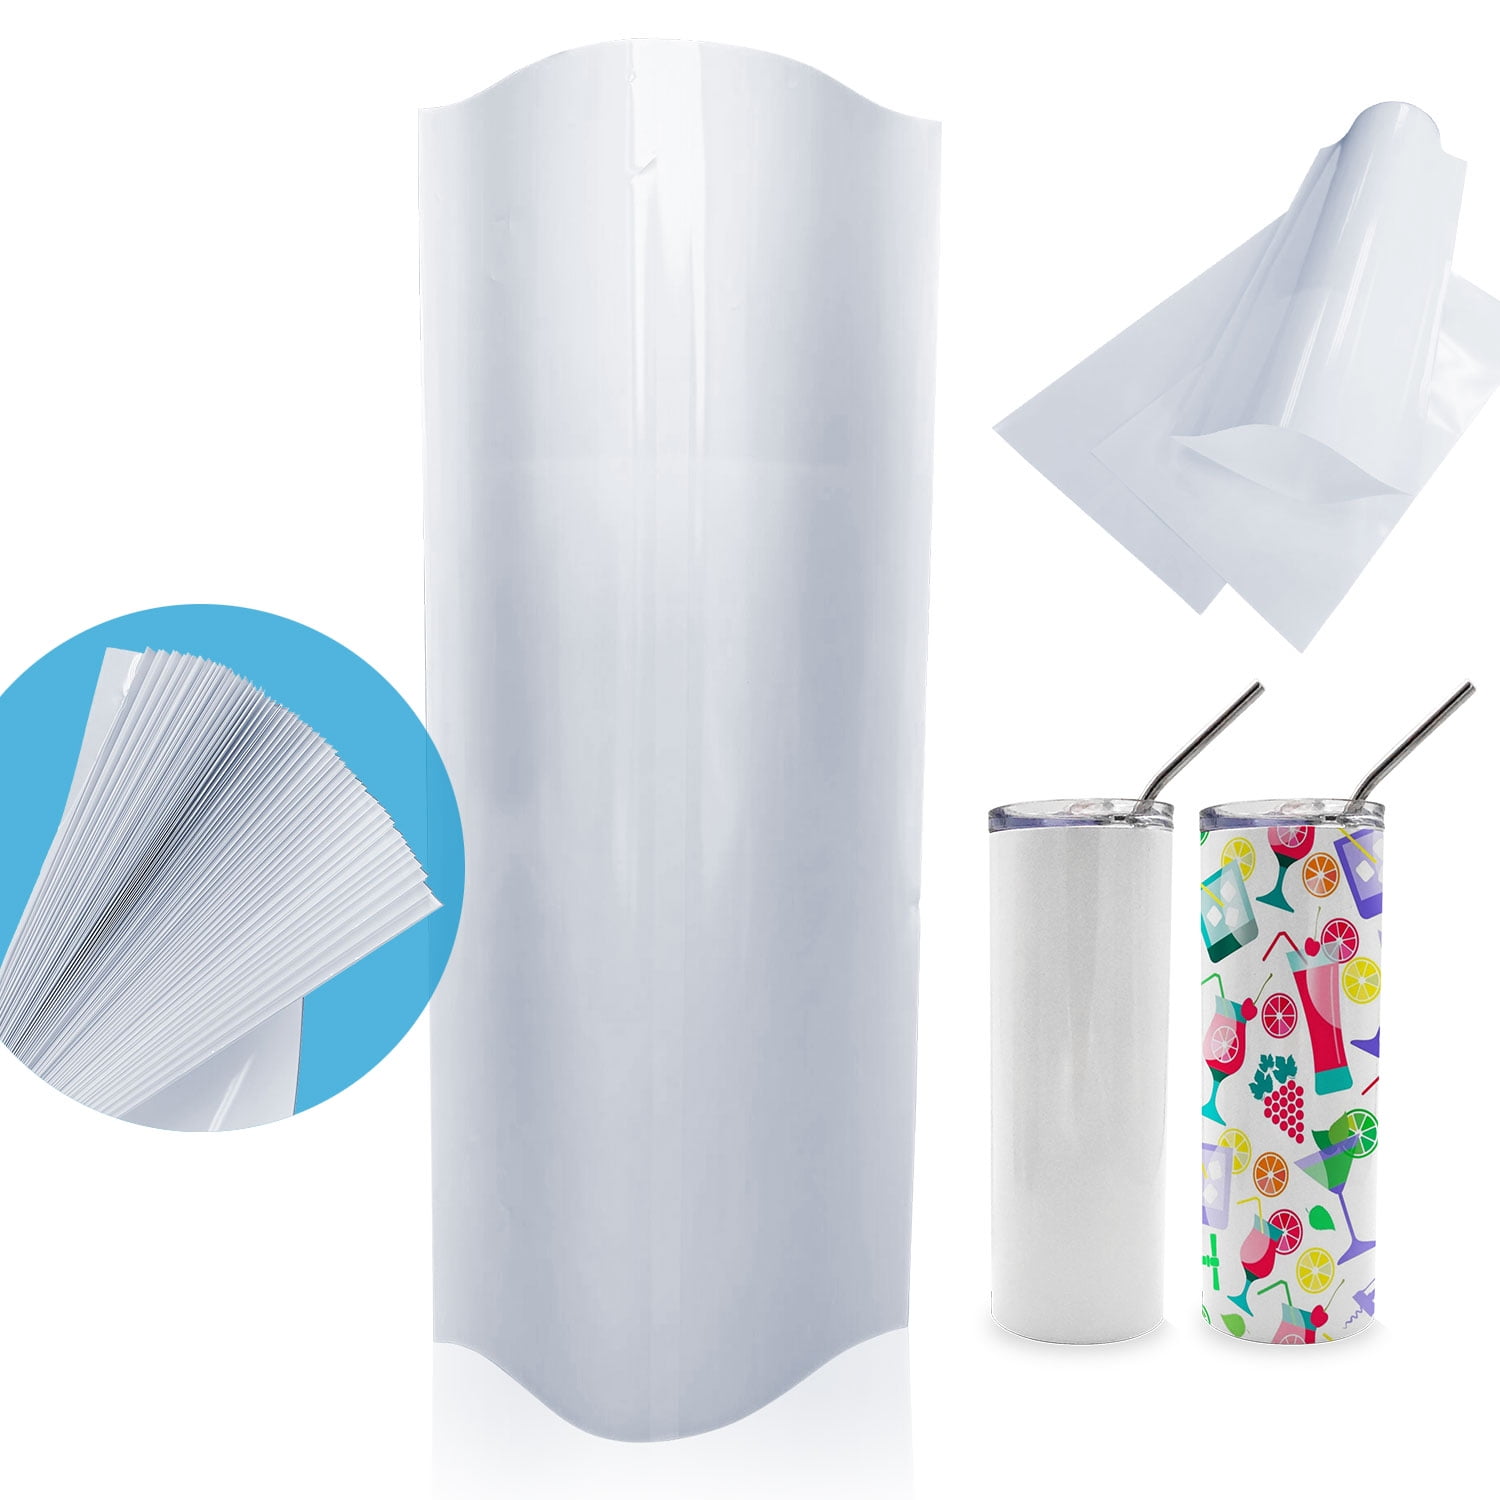 100 Pcs Sublimation Shrink Wrap Sleeves, 5x10 inch White Sublimation Shrink Wrap for Tumblers, Mugs, Cups, Sublimation Shrink Film 100 Pcs